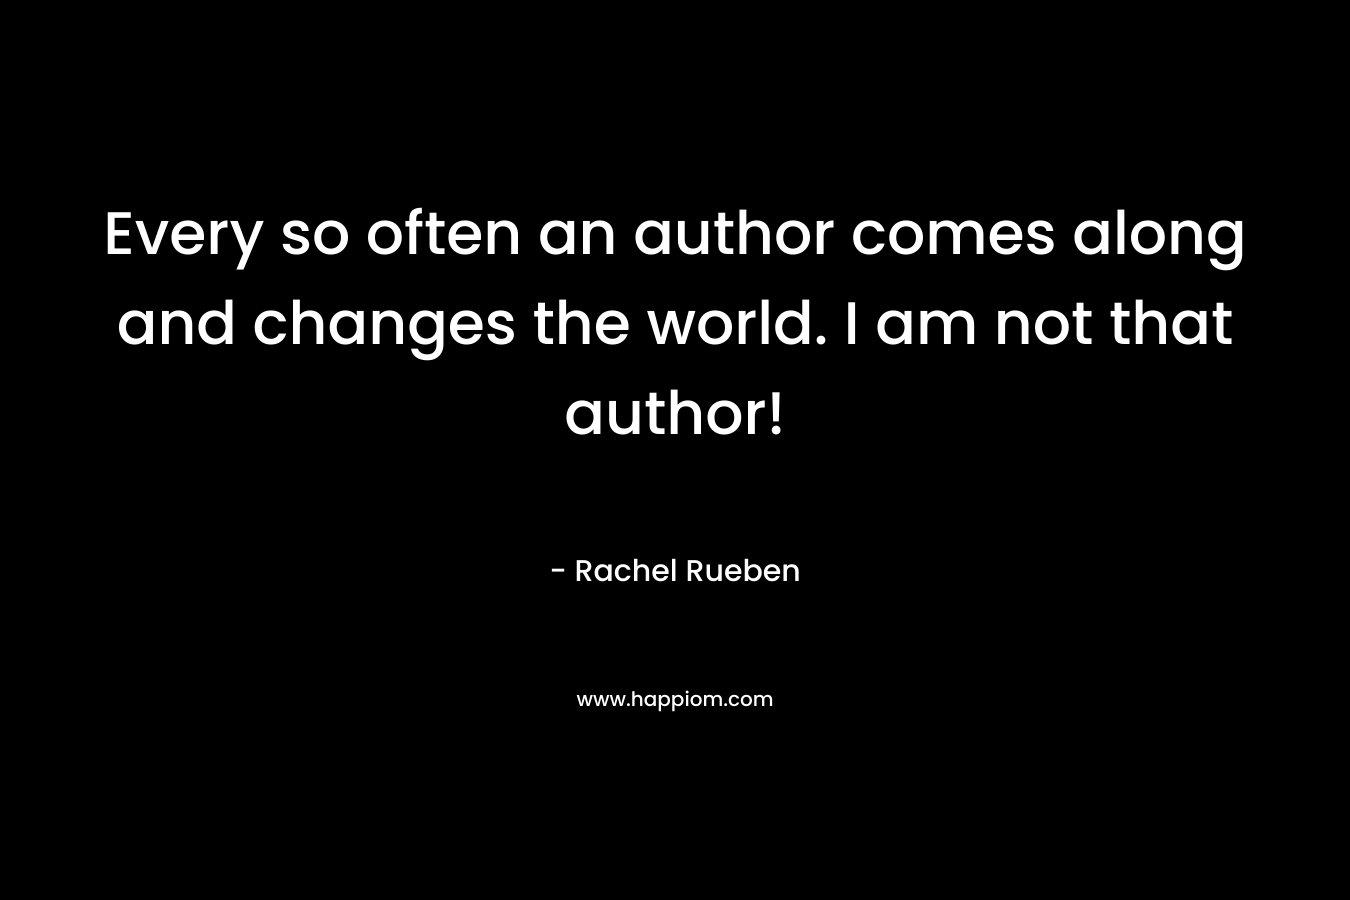 Every so often an author comes along and changes the world. I am not that author!